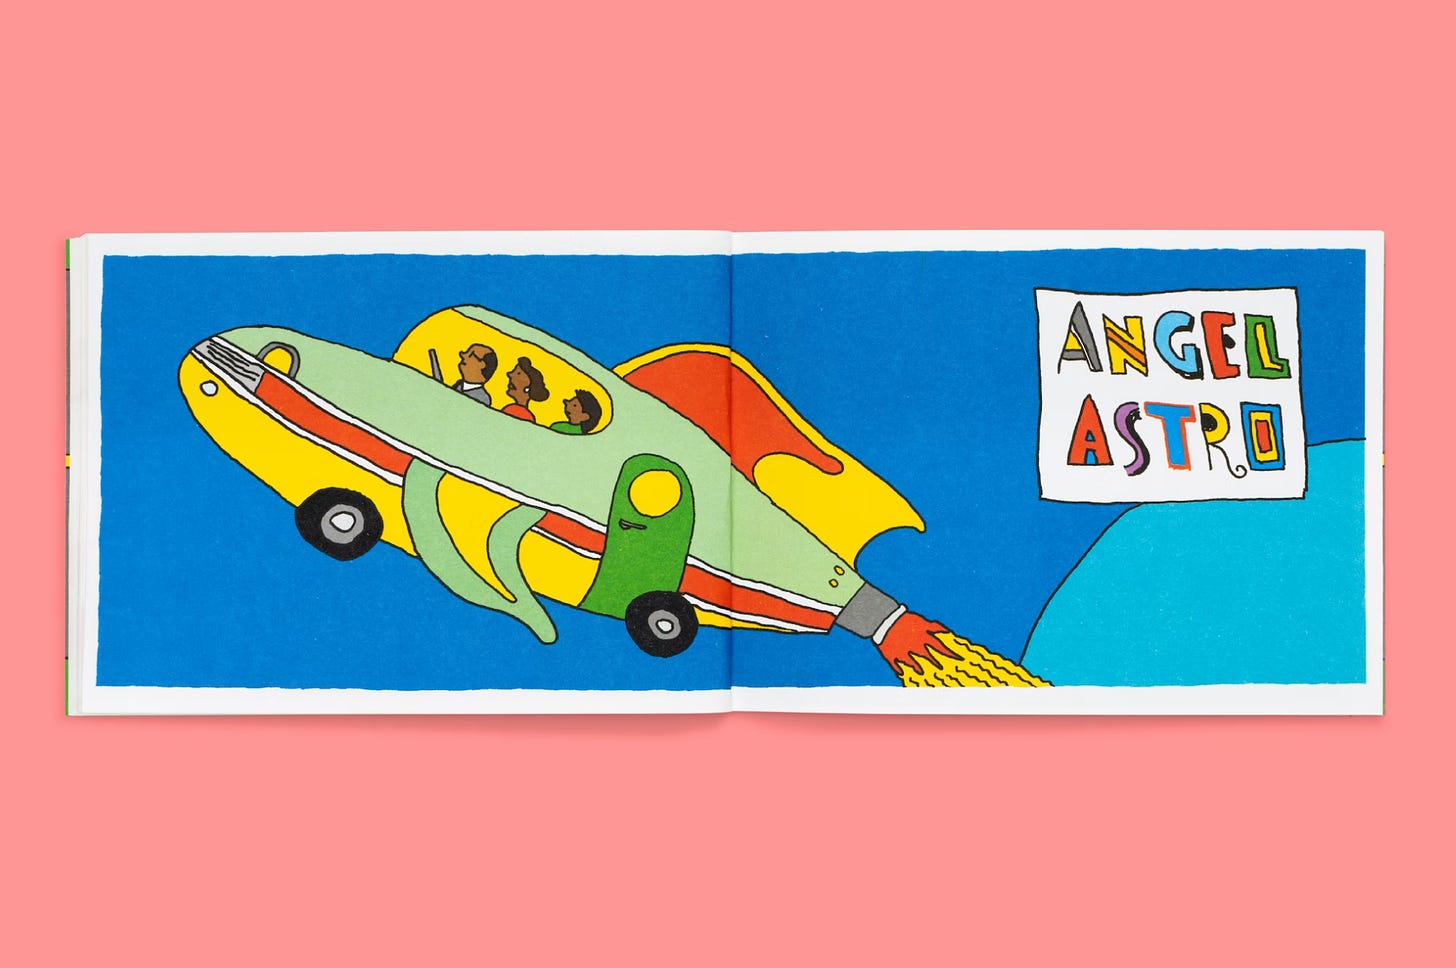 The image is of an illistration of a flying car named Angel Astro. It has green and yellow wings and a red and yellow fin. A man, a woman and a child are in the front seats flying the car through space. 